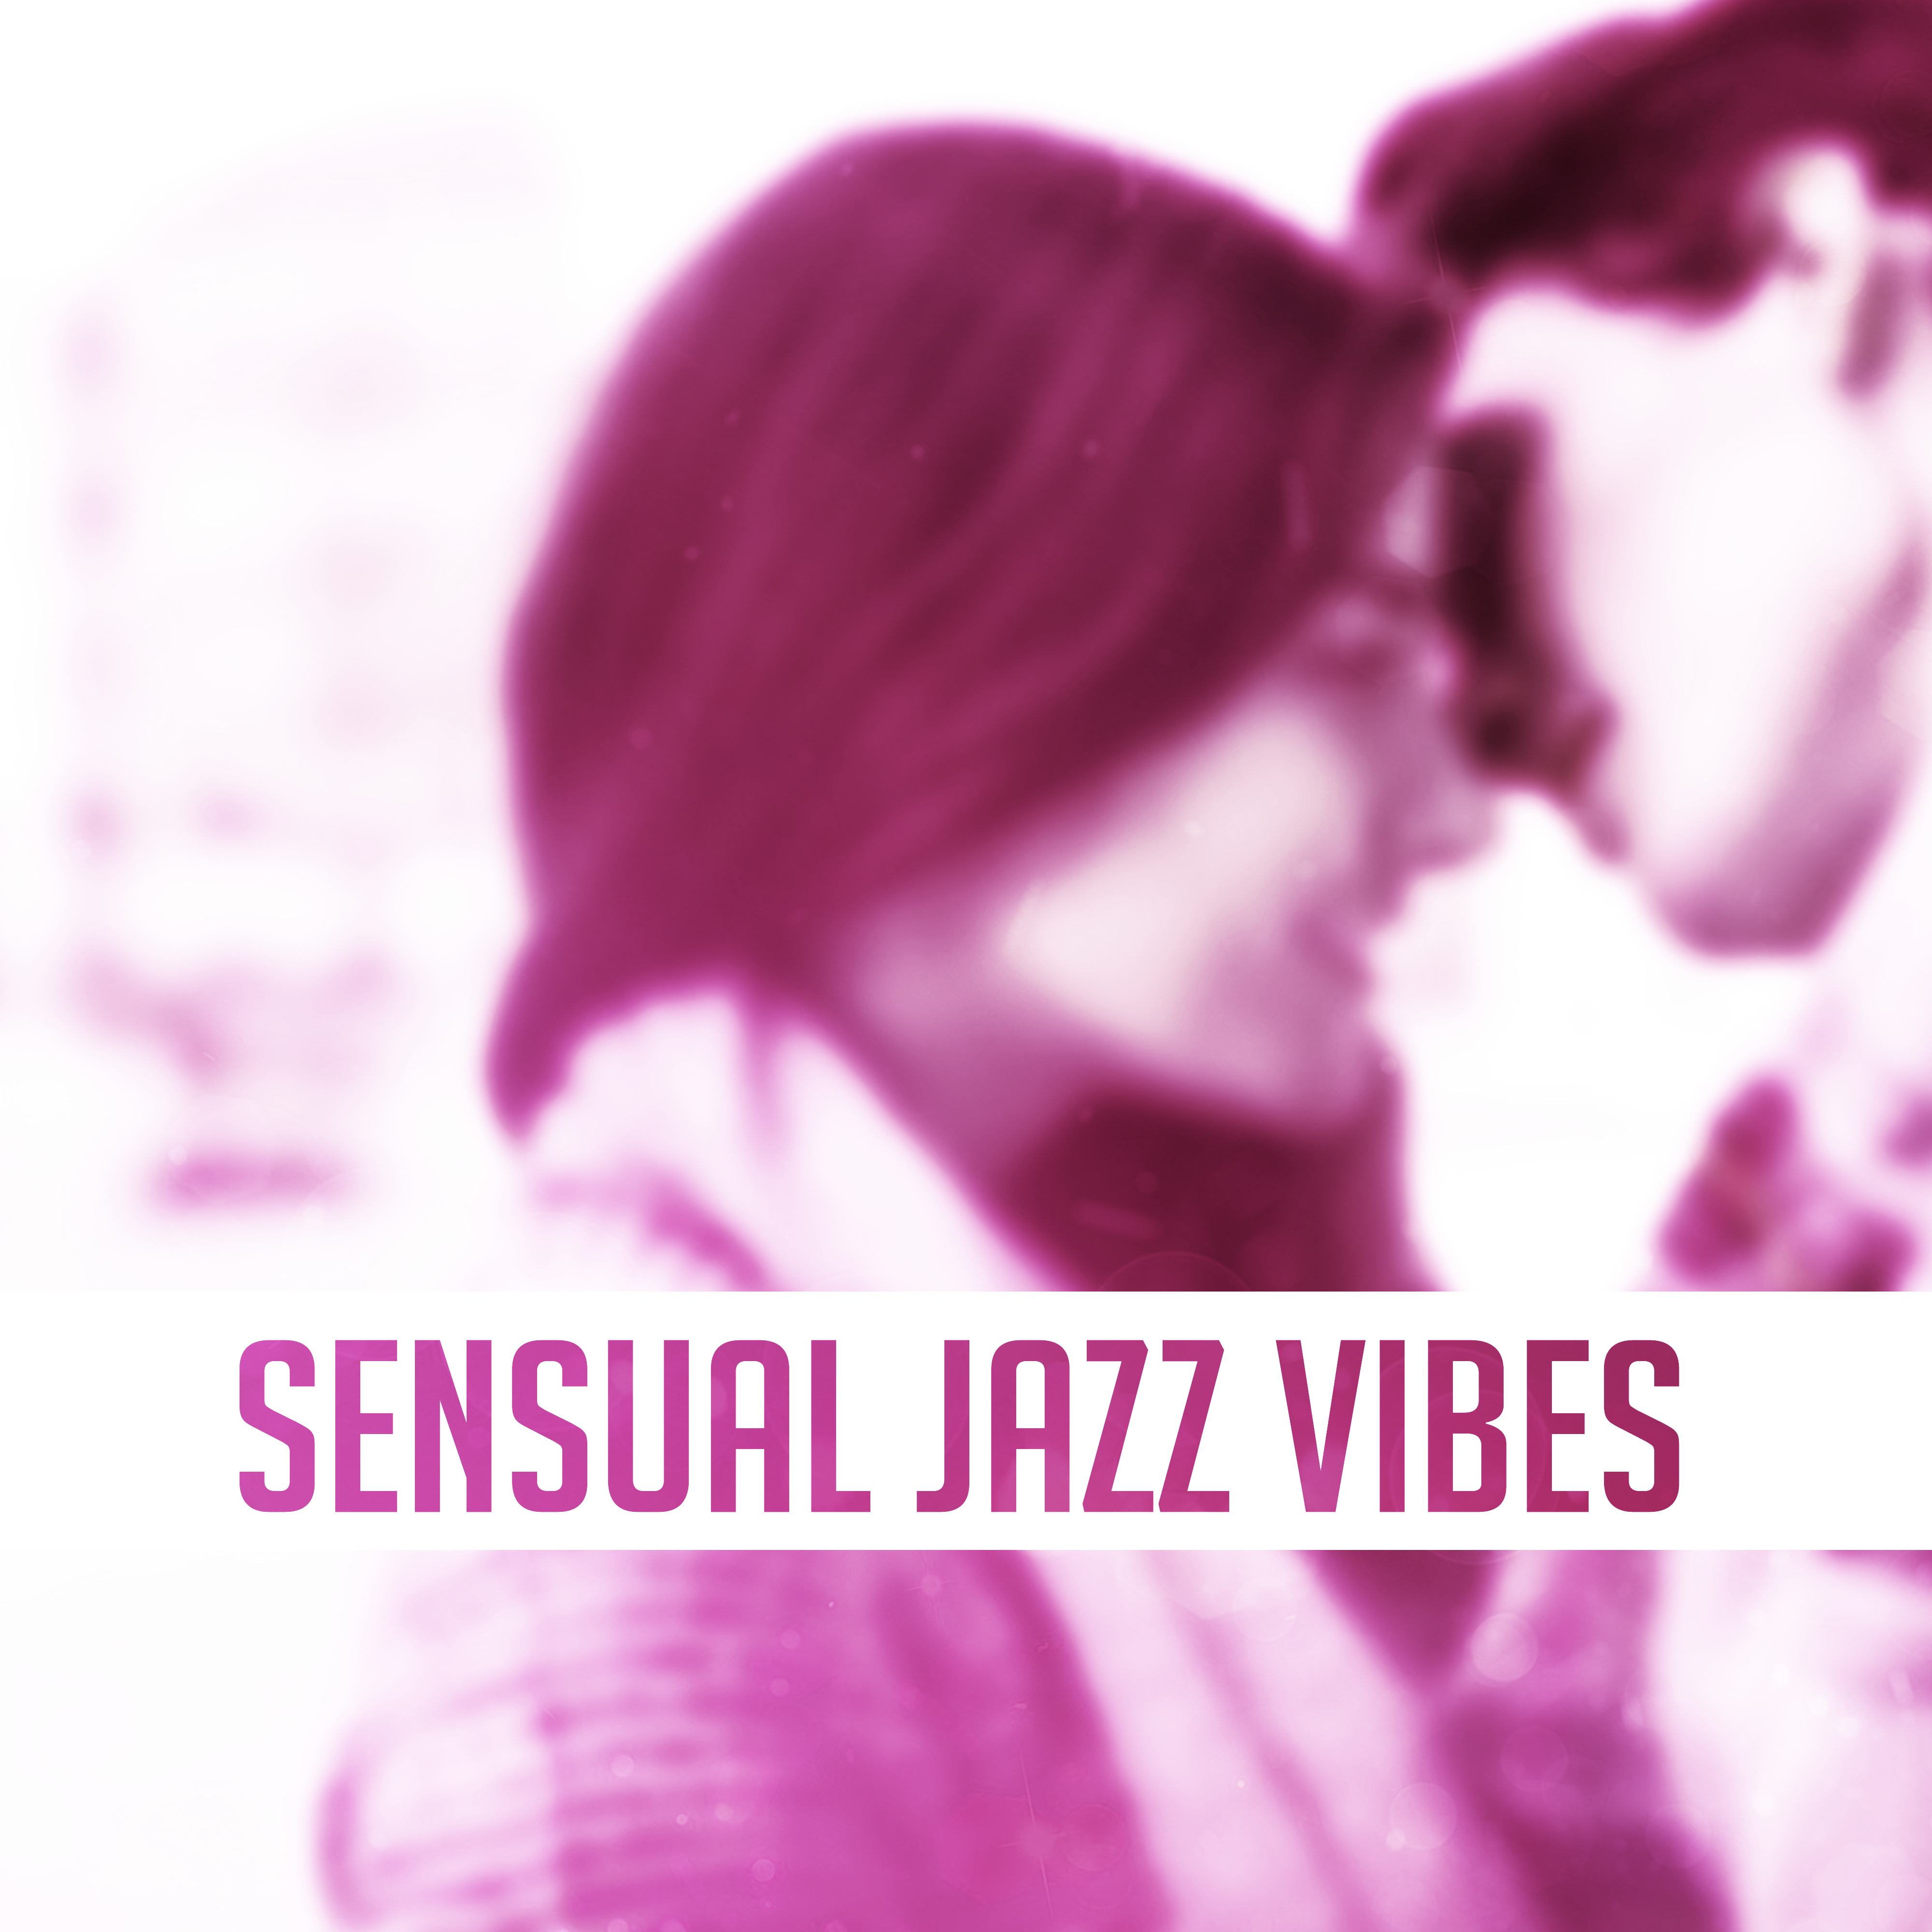 Sensual Jazz Vibes – Smooth Jazz Sounds, Music for Lovers, Erotic Moments, Time for Us